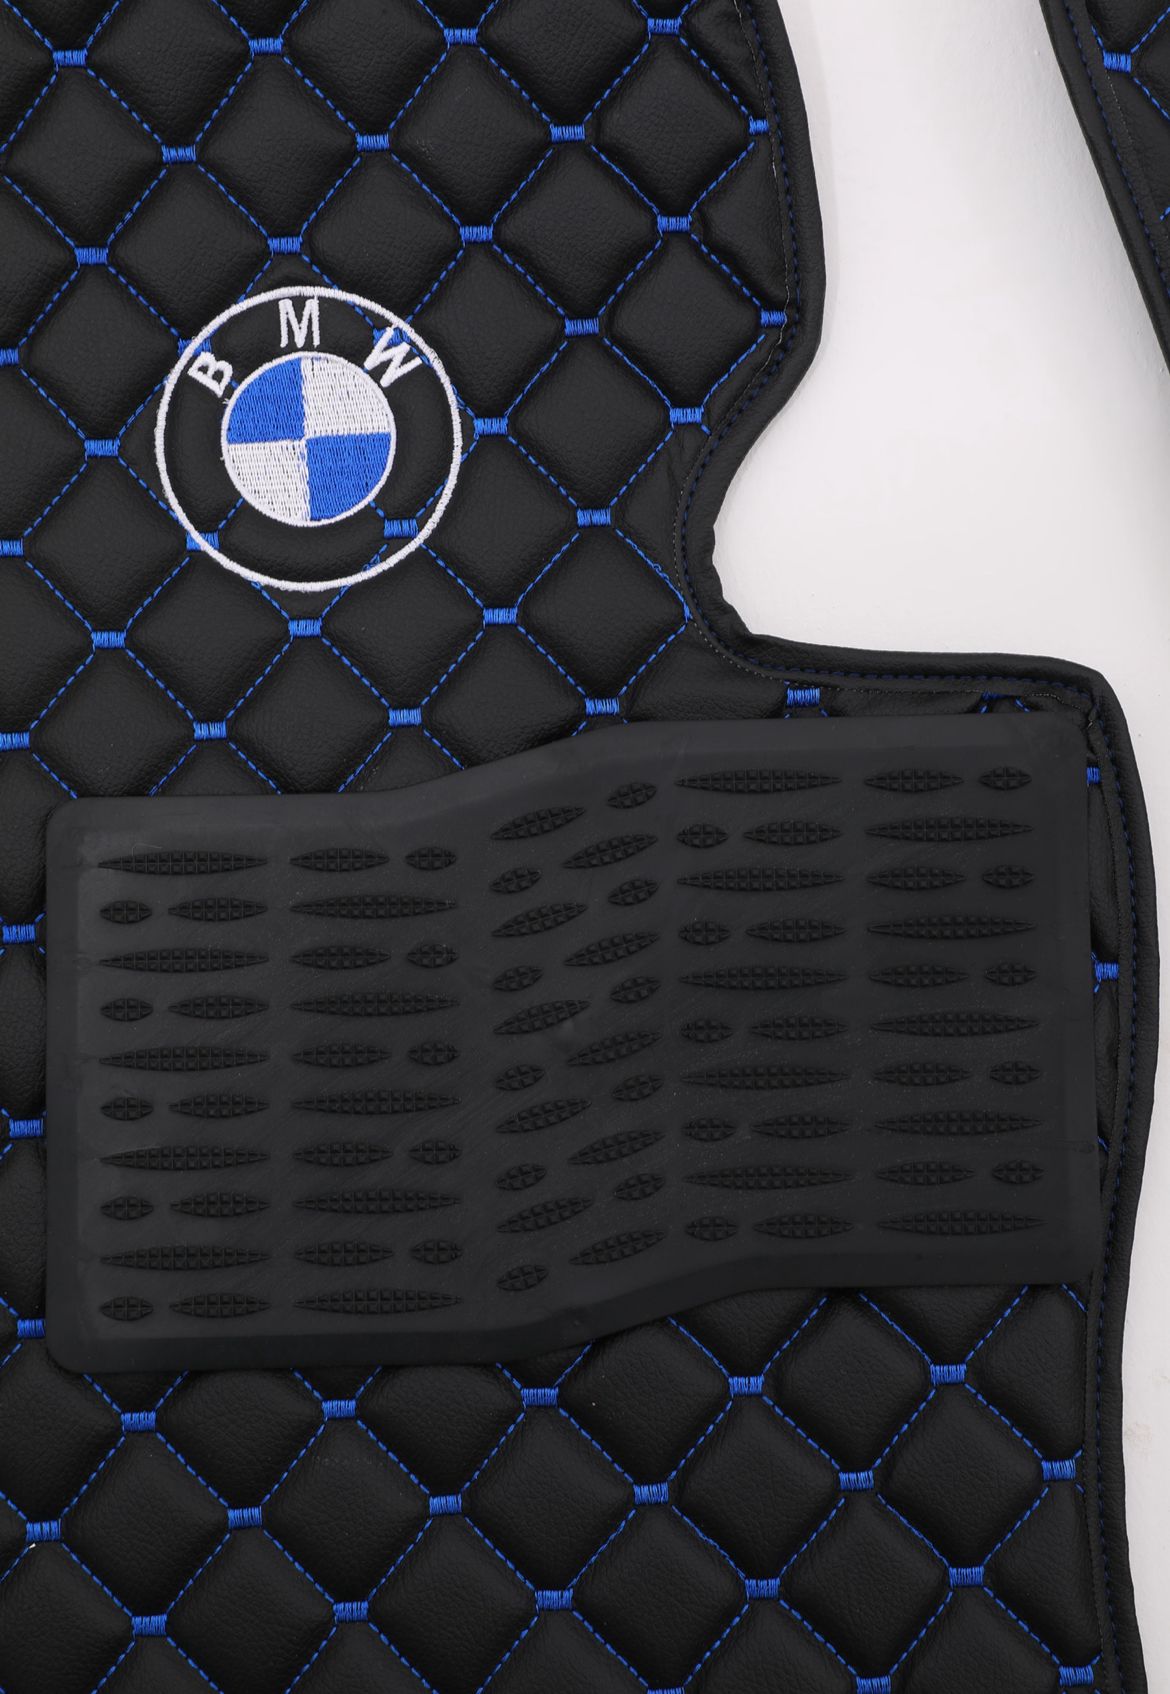 For all BMW E92 M Performance Luxury Leather Custom Car Mat 4x